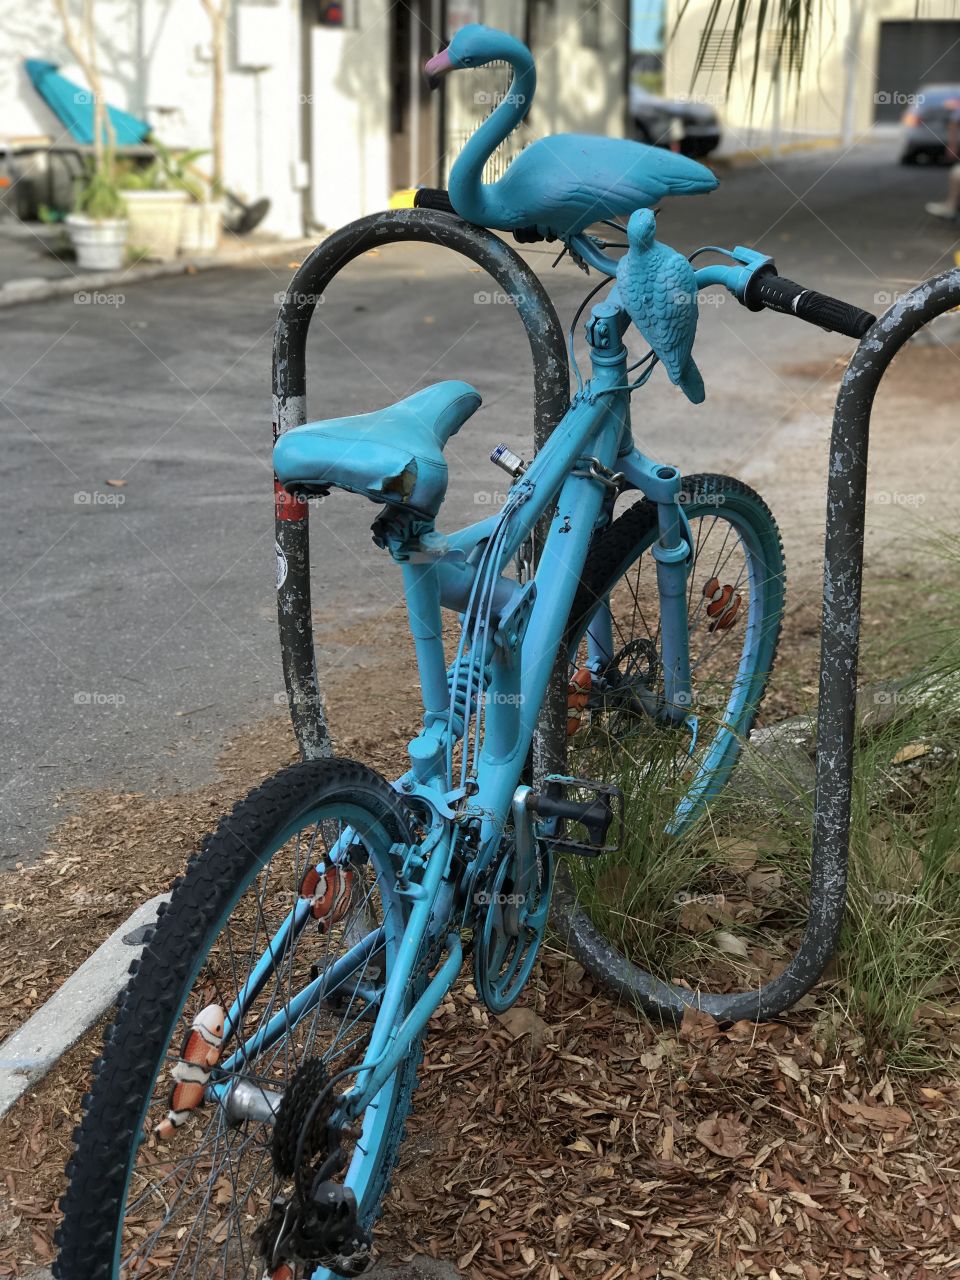 What happened to this bicycle?